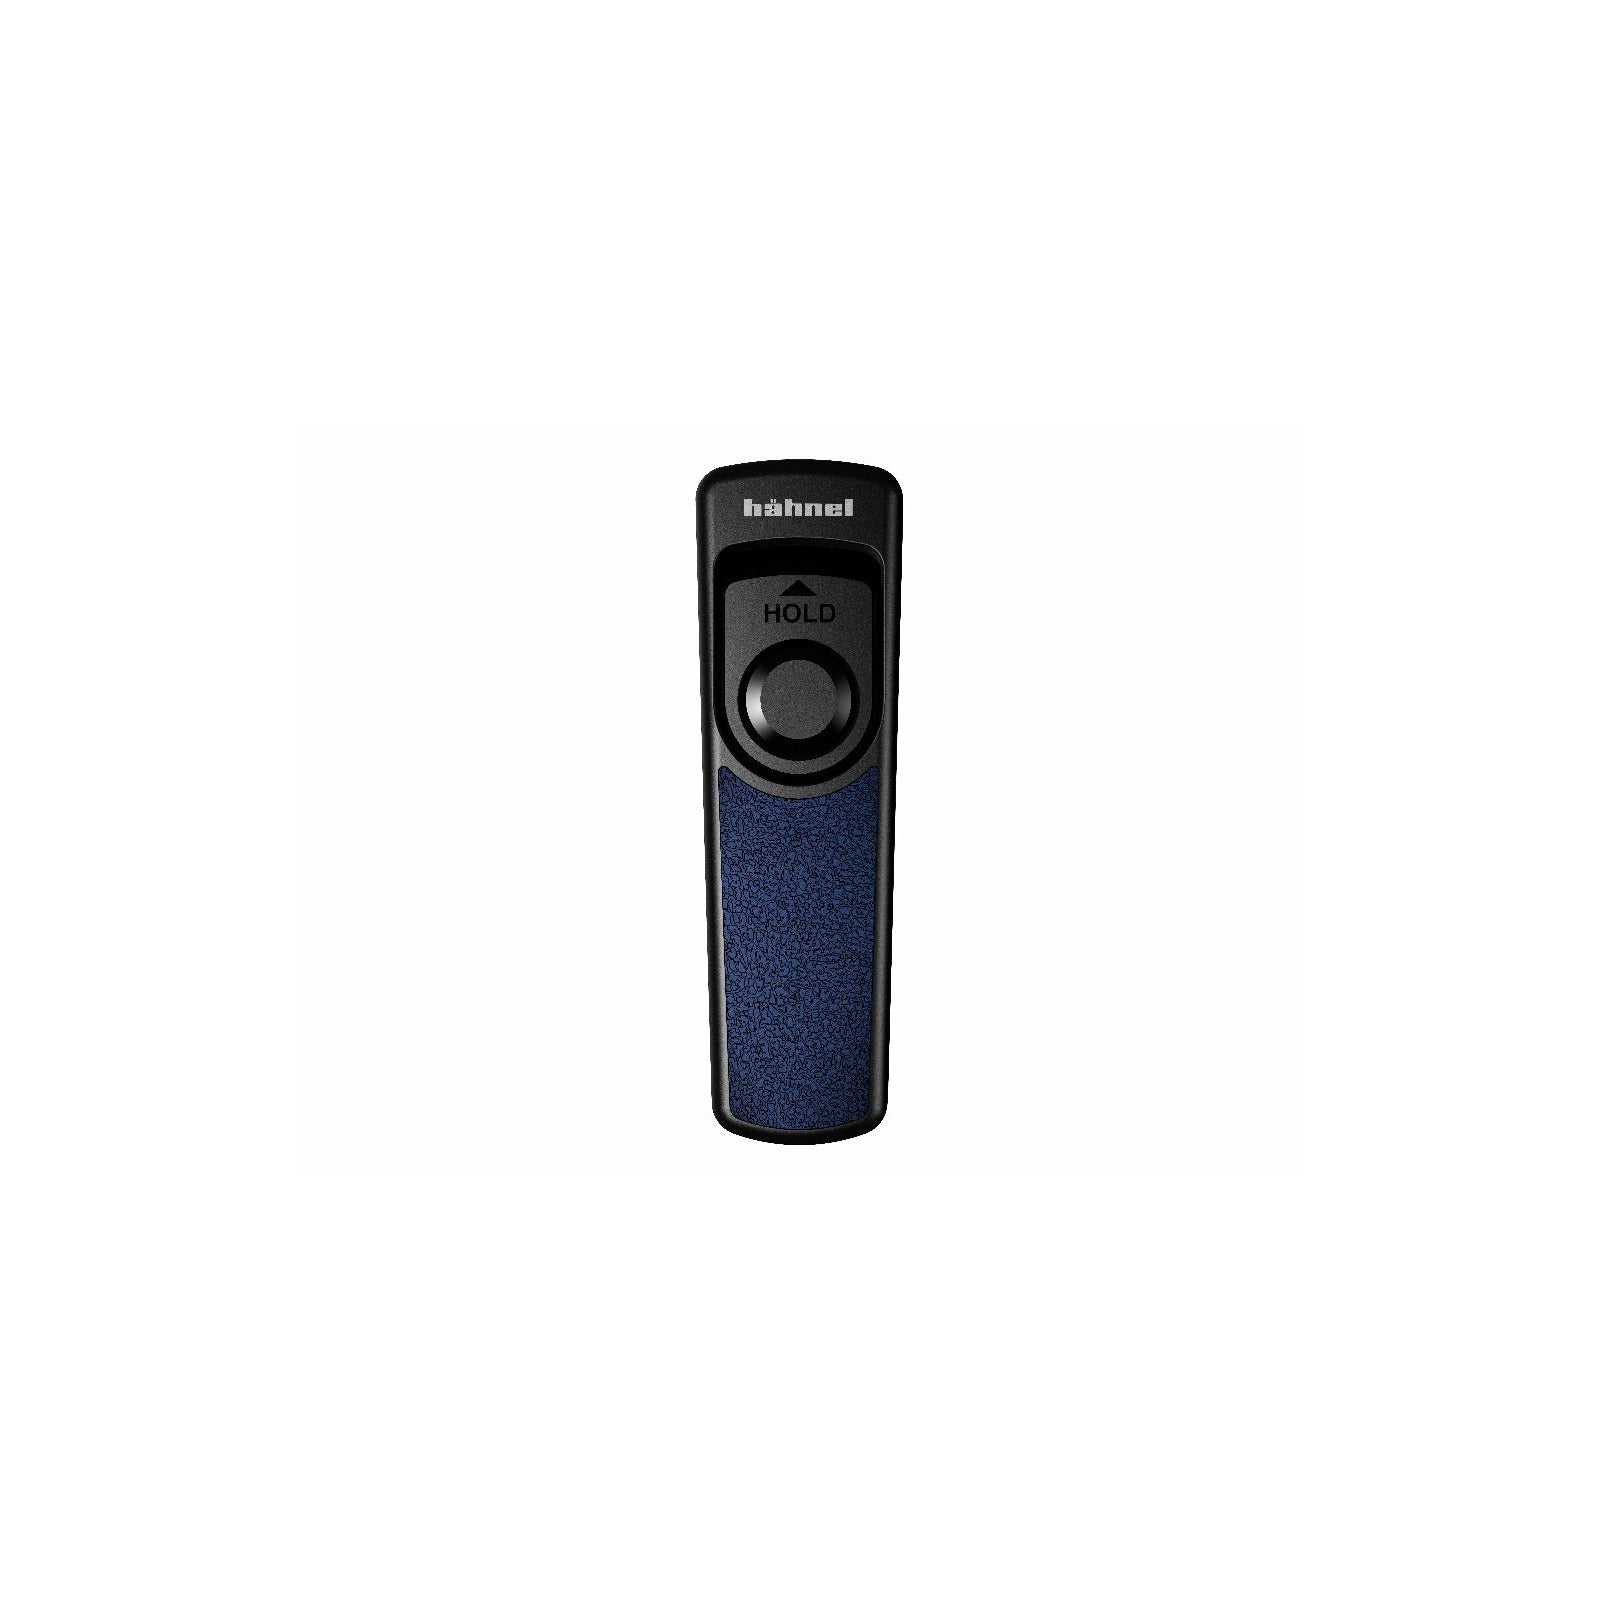 Hahnel HROP 280 Pro Remote Shutter Release For Olympus - Panasonic